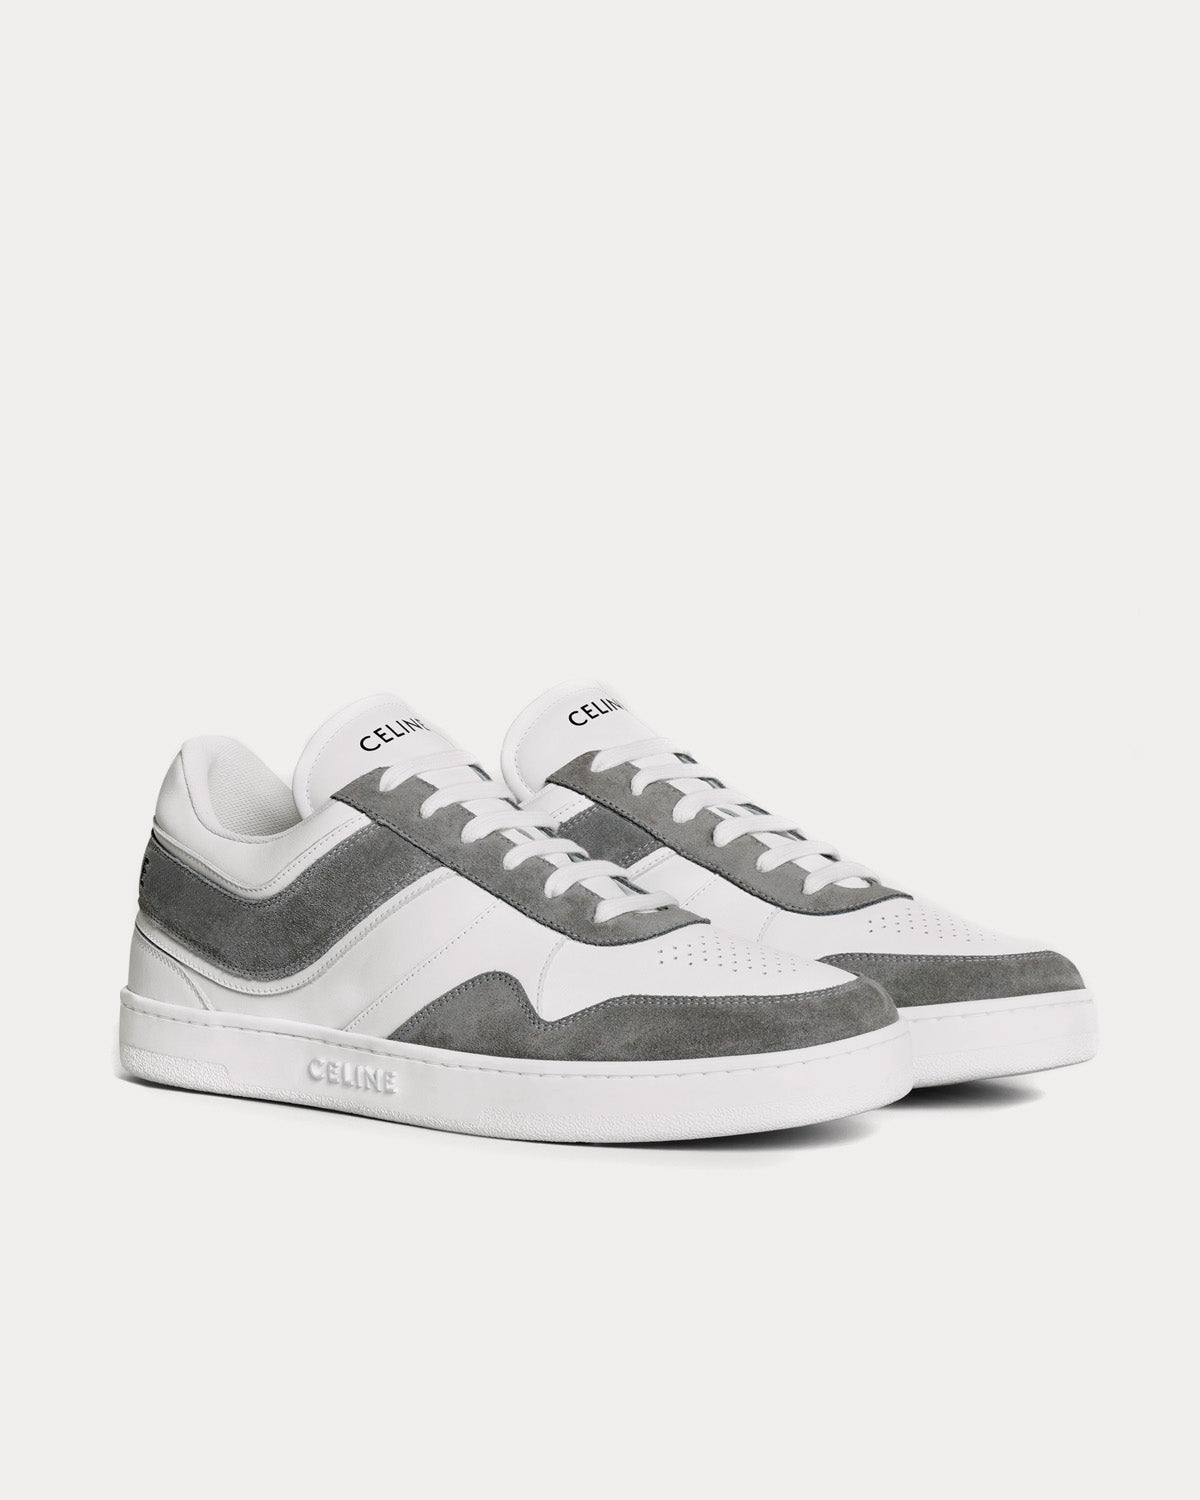 Celine - Lace-Up Suede & Calfskin Leather Grey / Optic White Low Top Sneakers